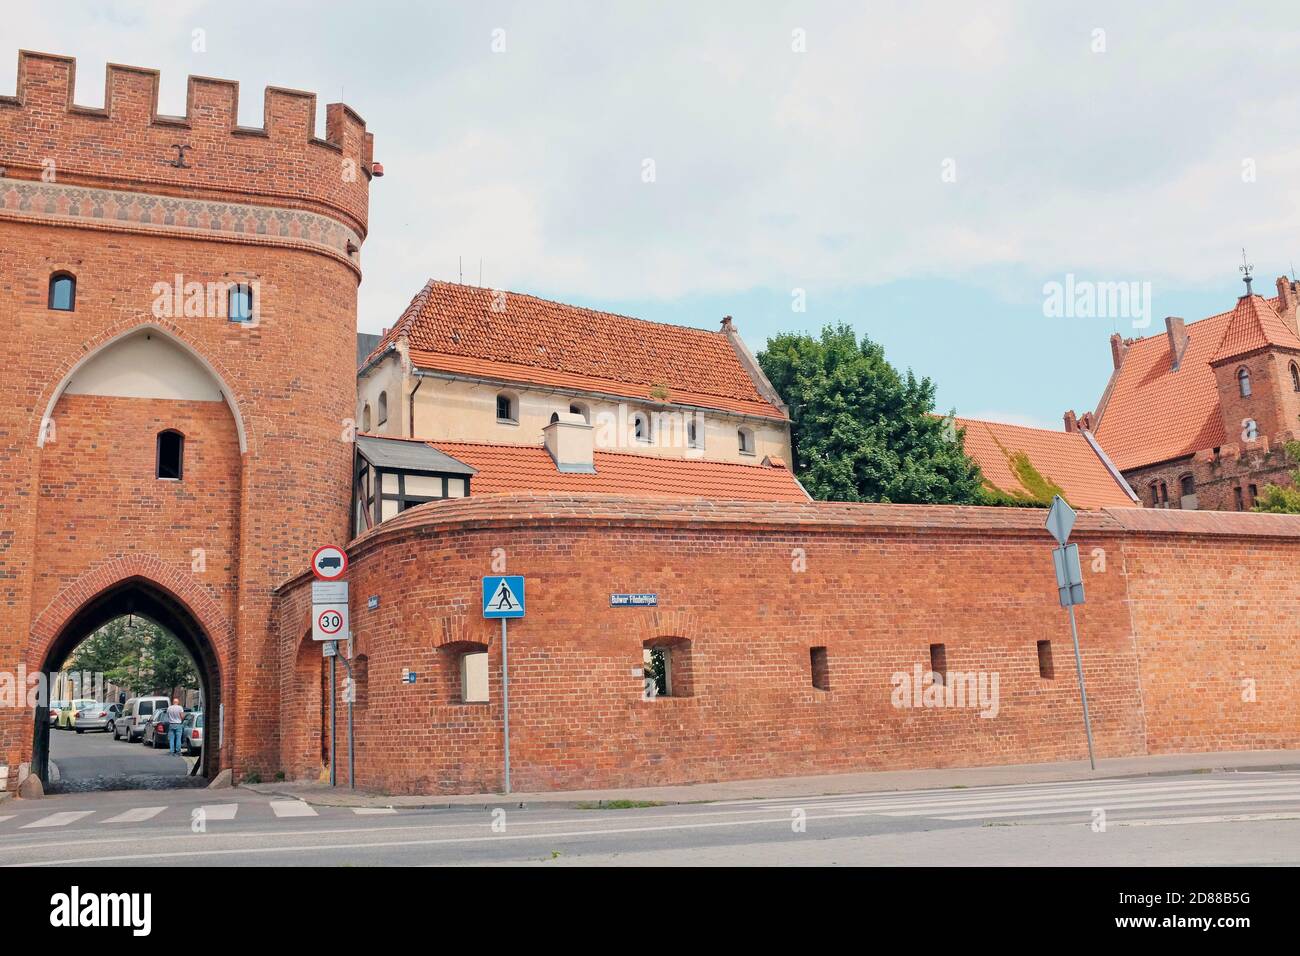 The Mostowa Gate, erected in 1492, stands along with the city walls around the old town of Torun, Poland. Stock Photo